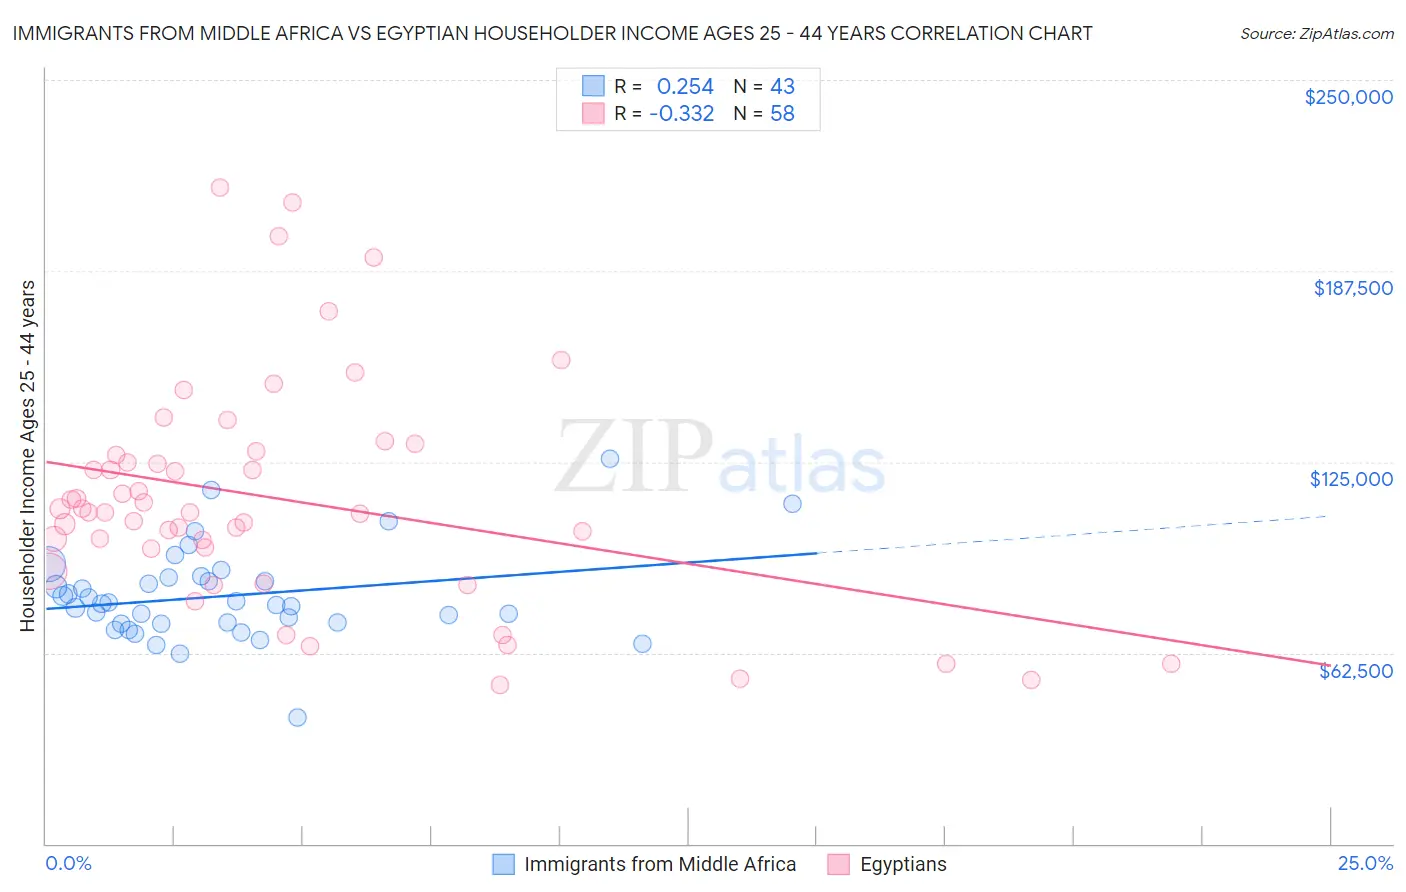 Immigrants from Middle Africa vs Egyptian Householder Income Ages 25 - 44 years